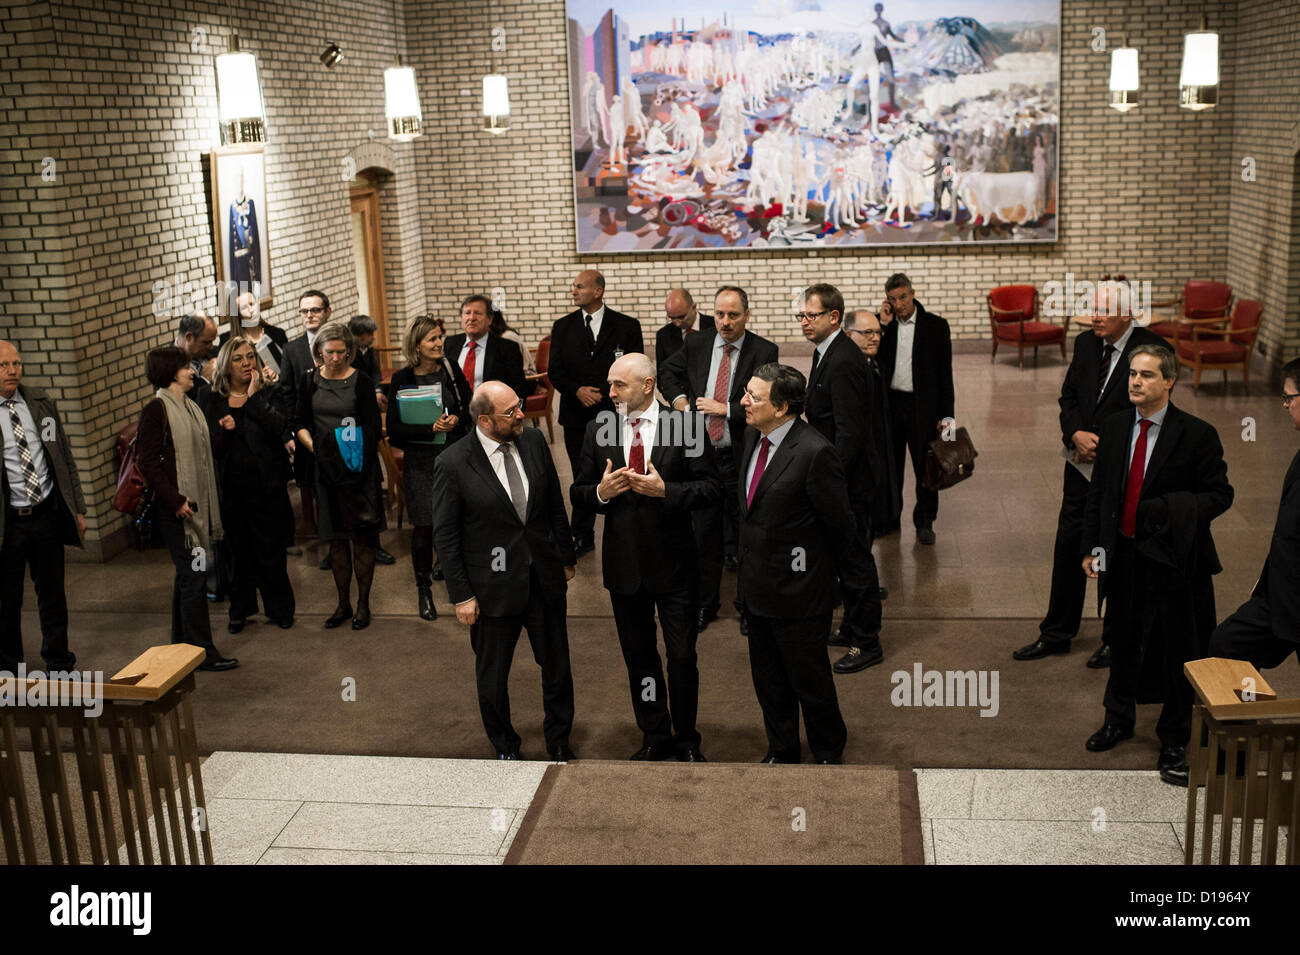 Oslo, Norway. 11/12/2012. Martin Schulz and Jose Manuel Barrosa meets the President of the Storting, Dag Terje Andersen before attending two  meetings, one with the President, and one with Foreign Affairs and Defence Committe. Credit:  Alexander Widding / Alamy Live News Stock Photo